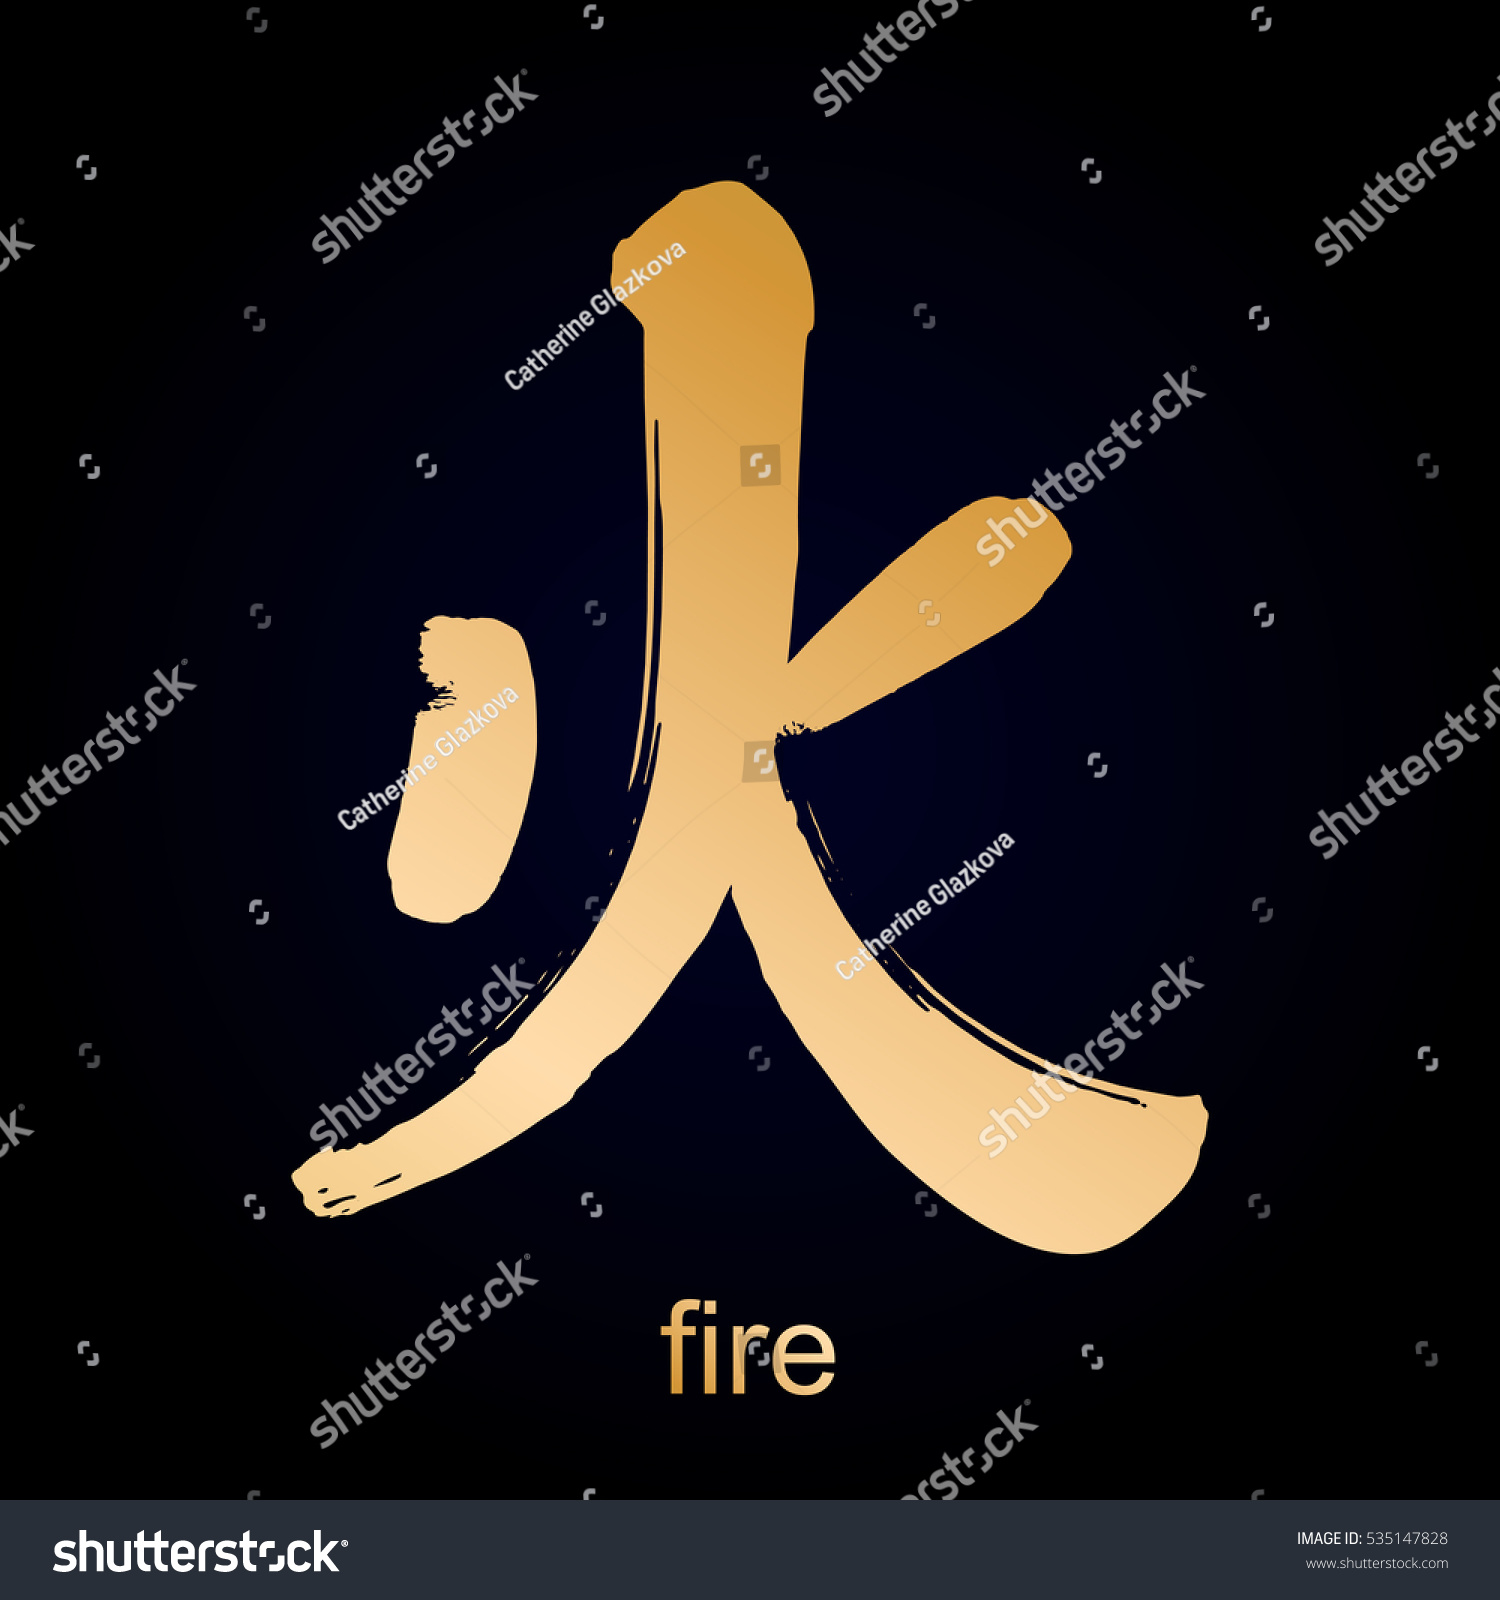 Stock Vector Japanese Kanji Calligraphic Word Translated As Fire Traditional Asian Design Drawn With Dry Brush 535147828 